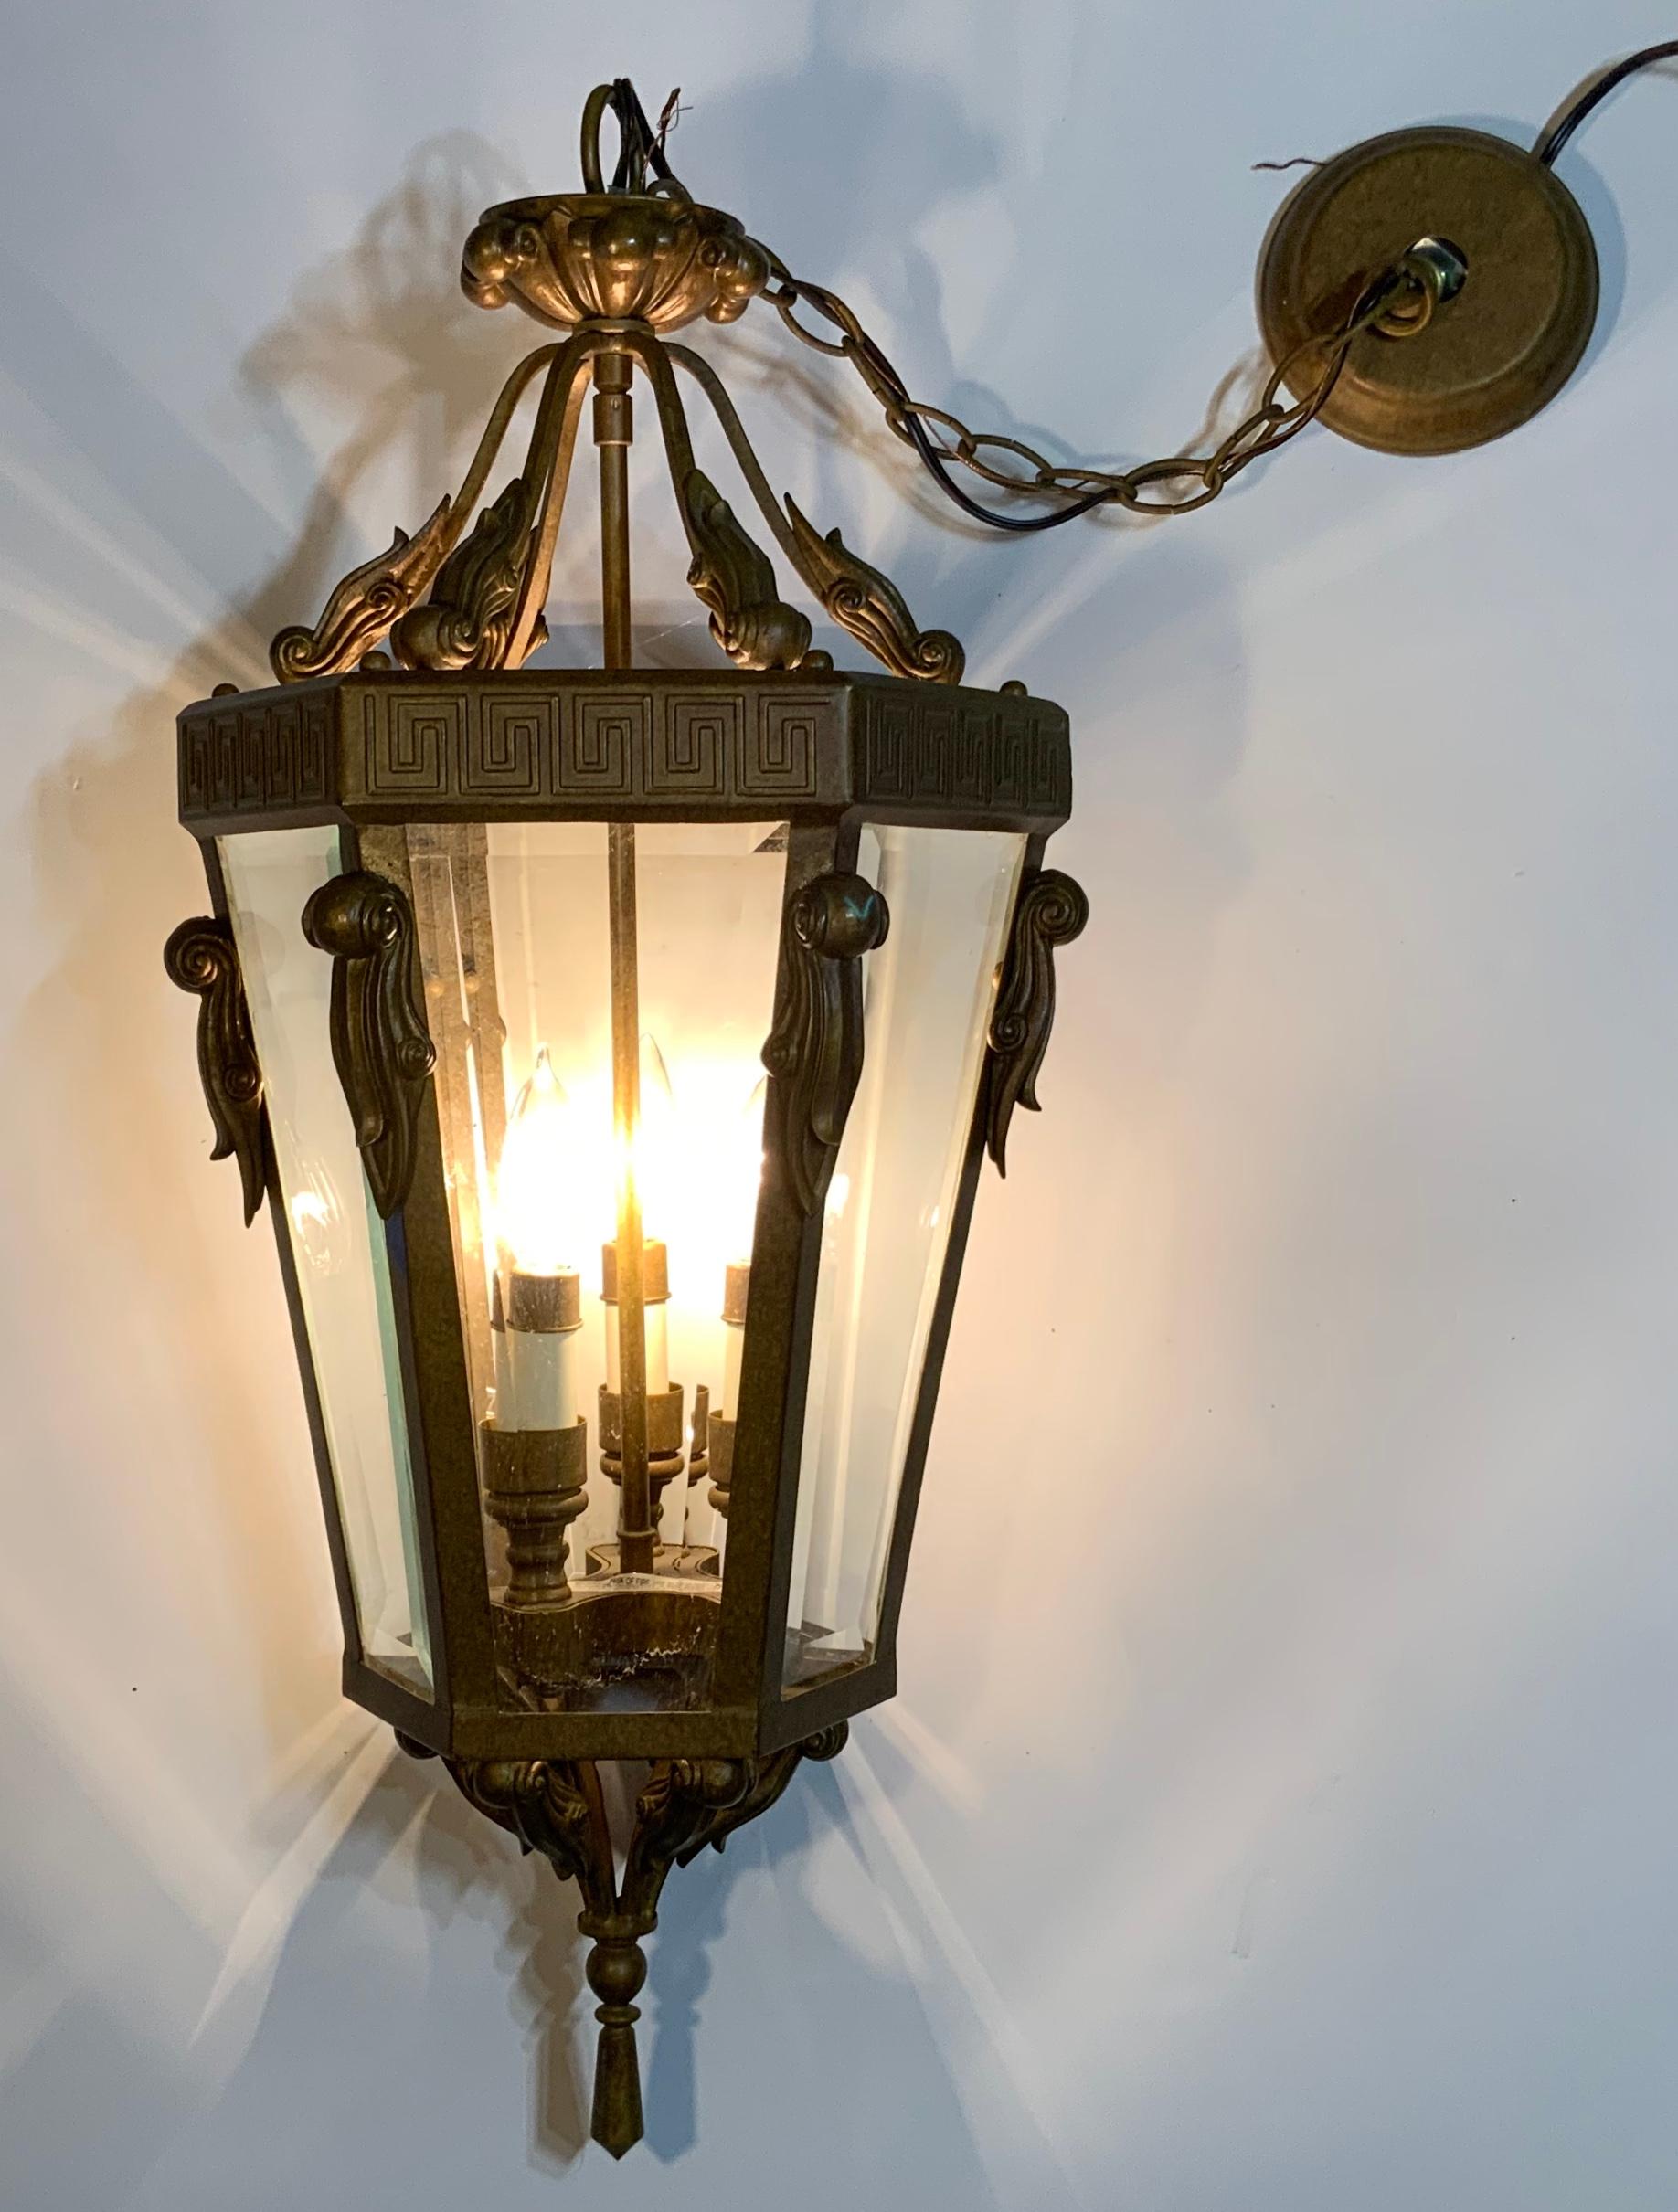 Vintage hanging lantern made of metal with three 60/watt light. Beveled glass on six sides, beautiful Greek key top decoration, and composition resin decoration on top and bottom.
Original canopy and chain included.